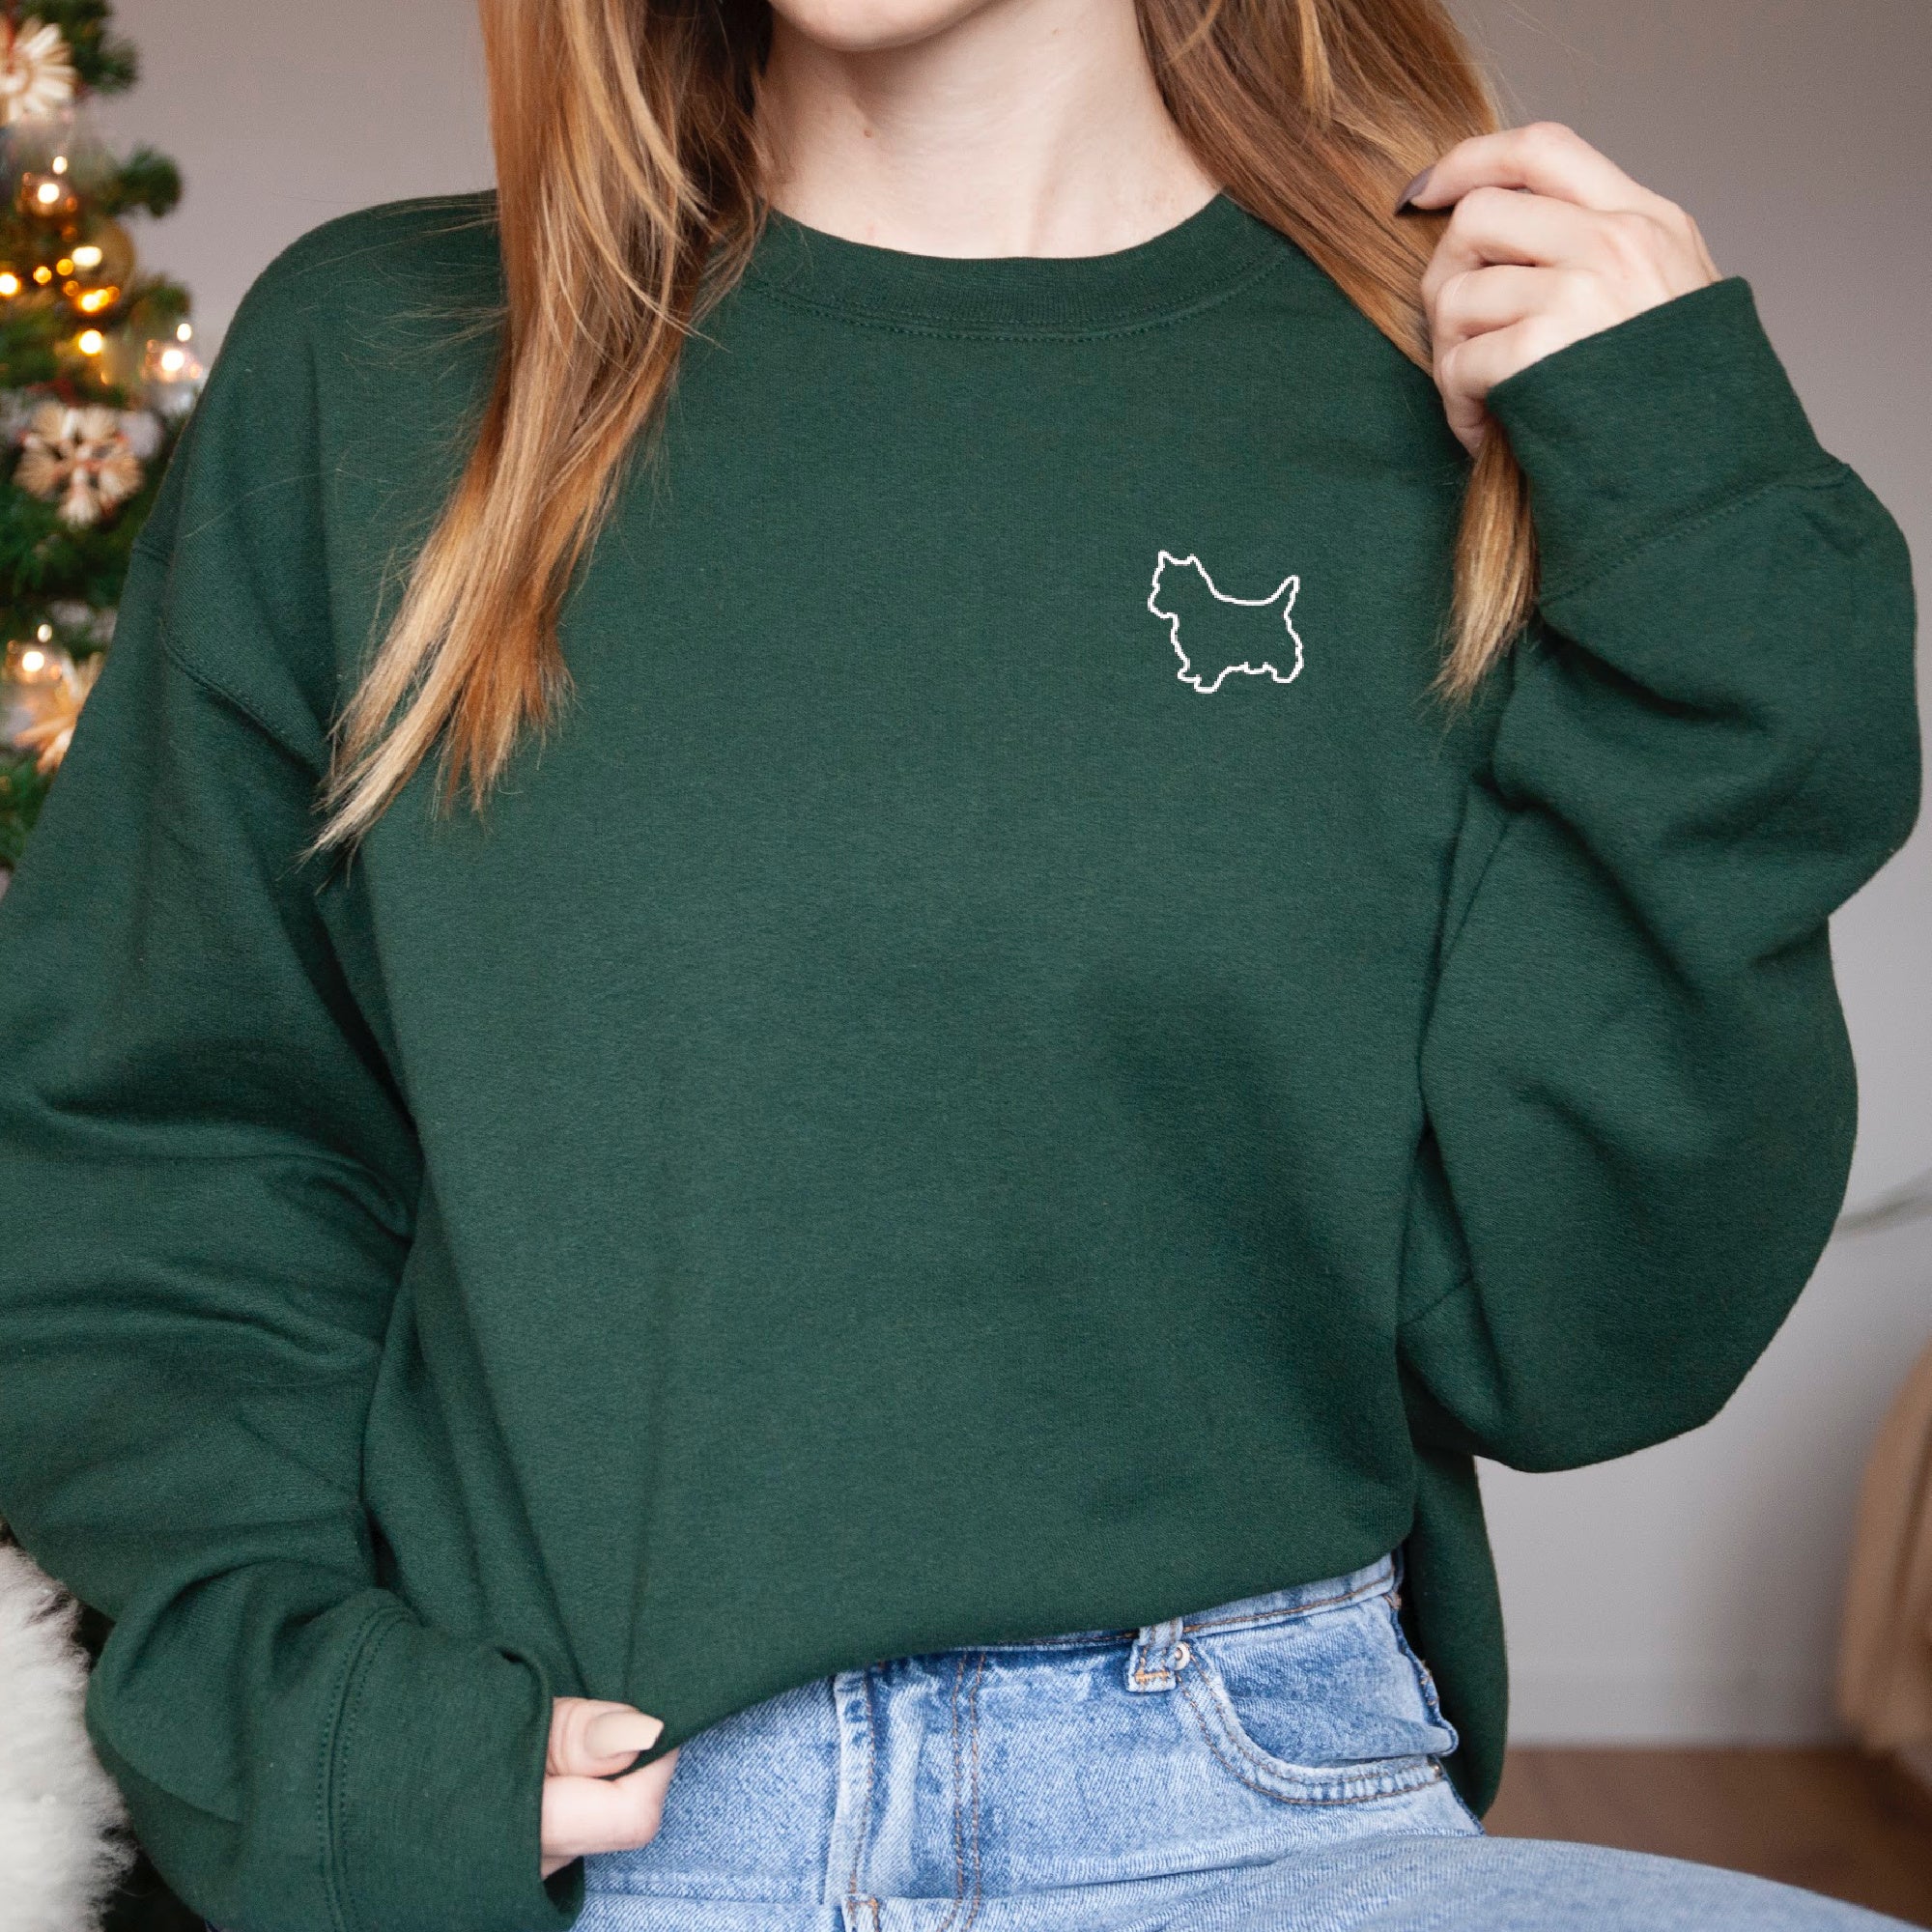 Dog Silhouette Sweatshirt - Customise with ANY Dog Breed - Unisex Relaxed Fit